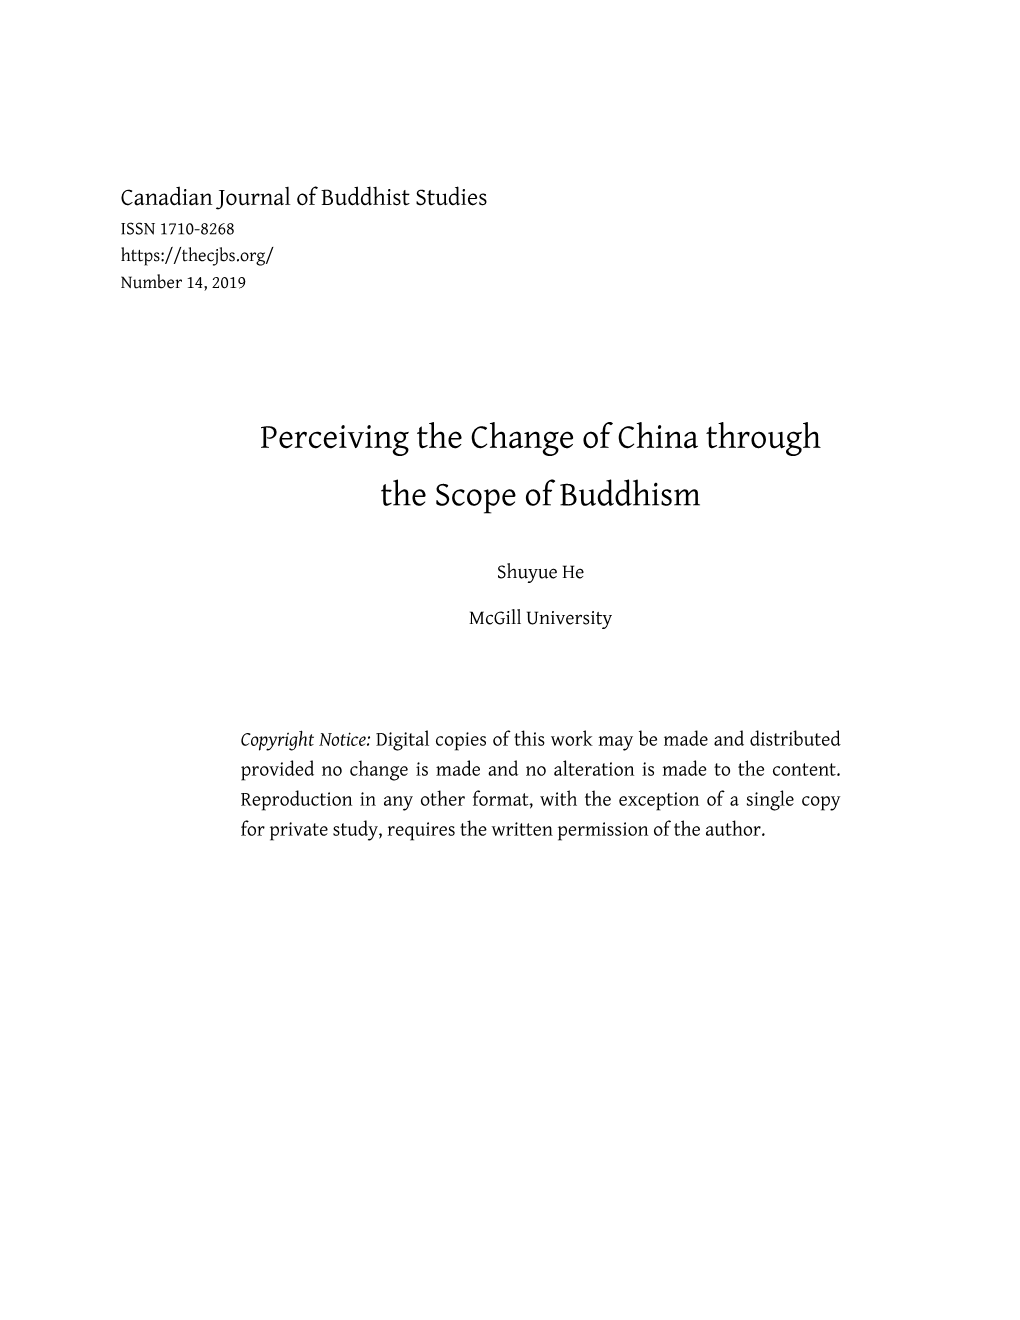 Perceiving the Change of China Through the Scope of Buddhism